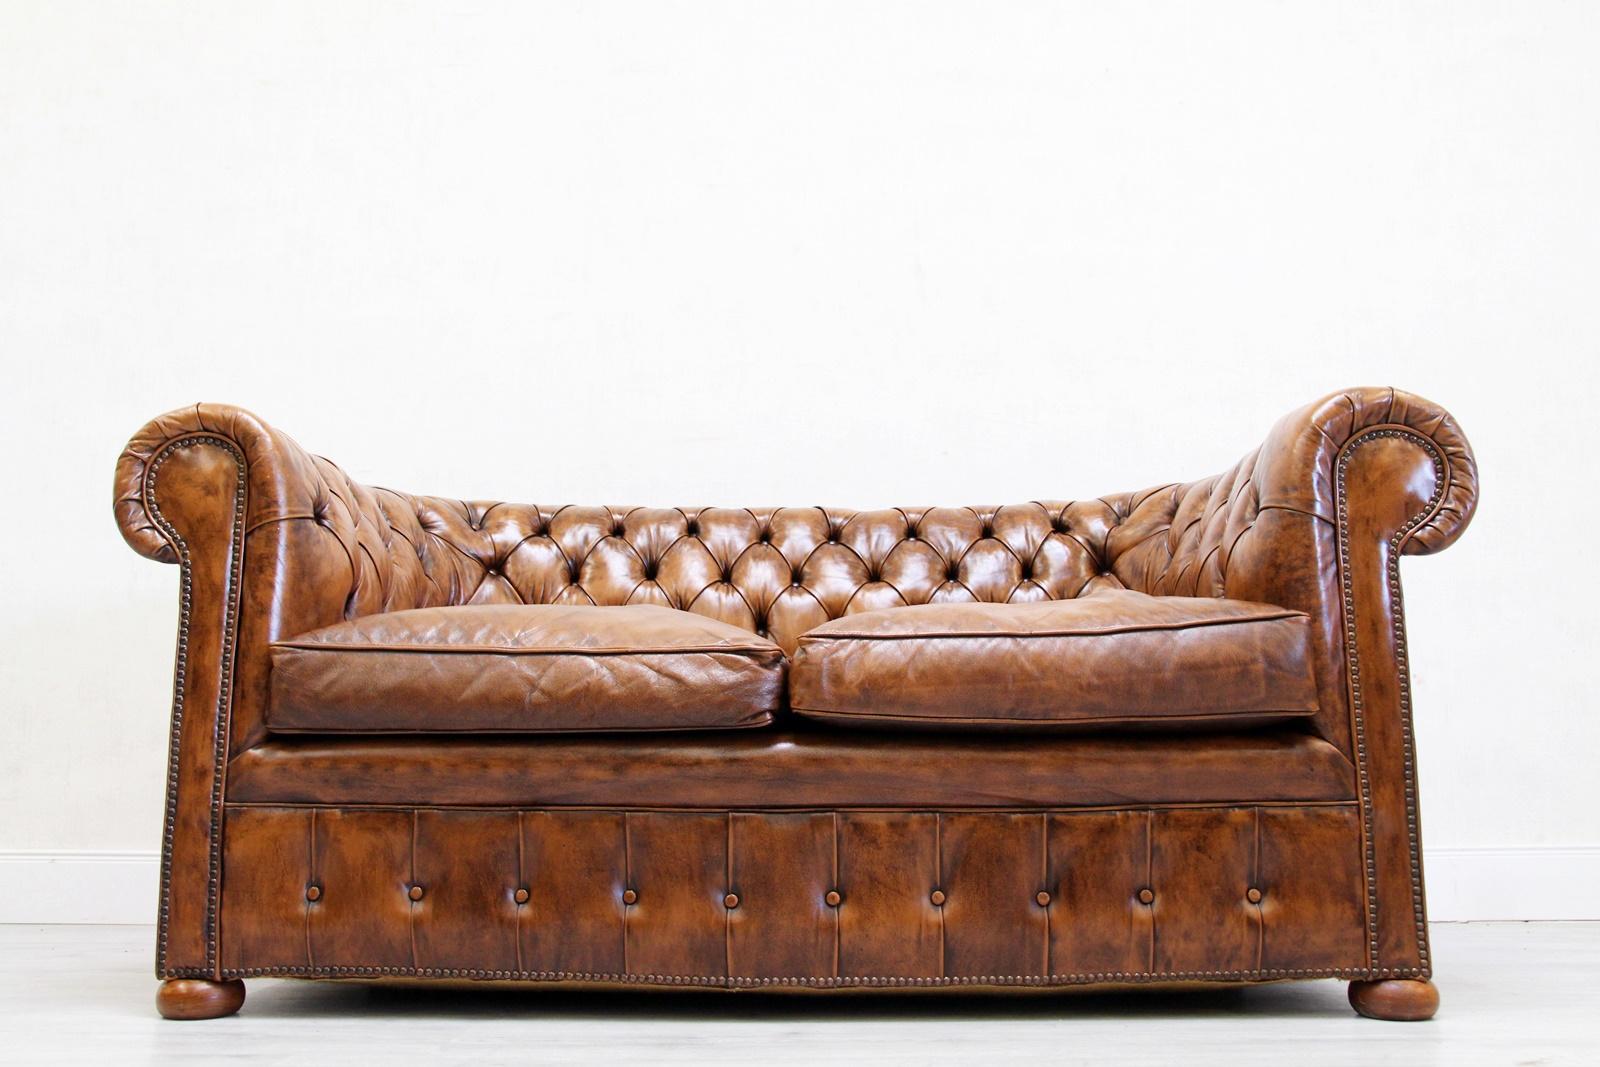 2 Chesterfield Sofa Leather Antique Vintage Couch English Chippendal In Good Condition For Sale In Lage, DE